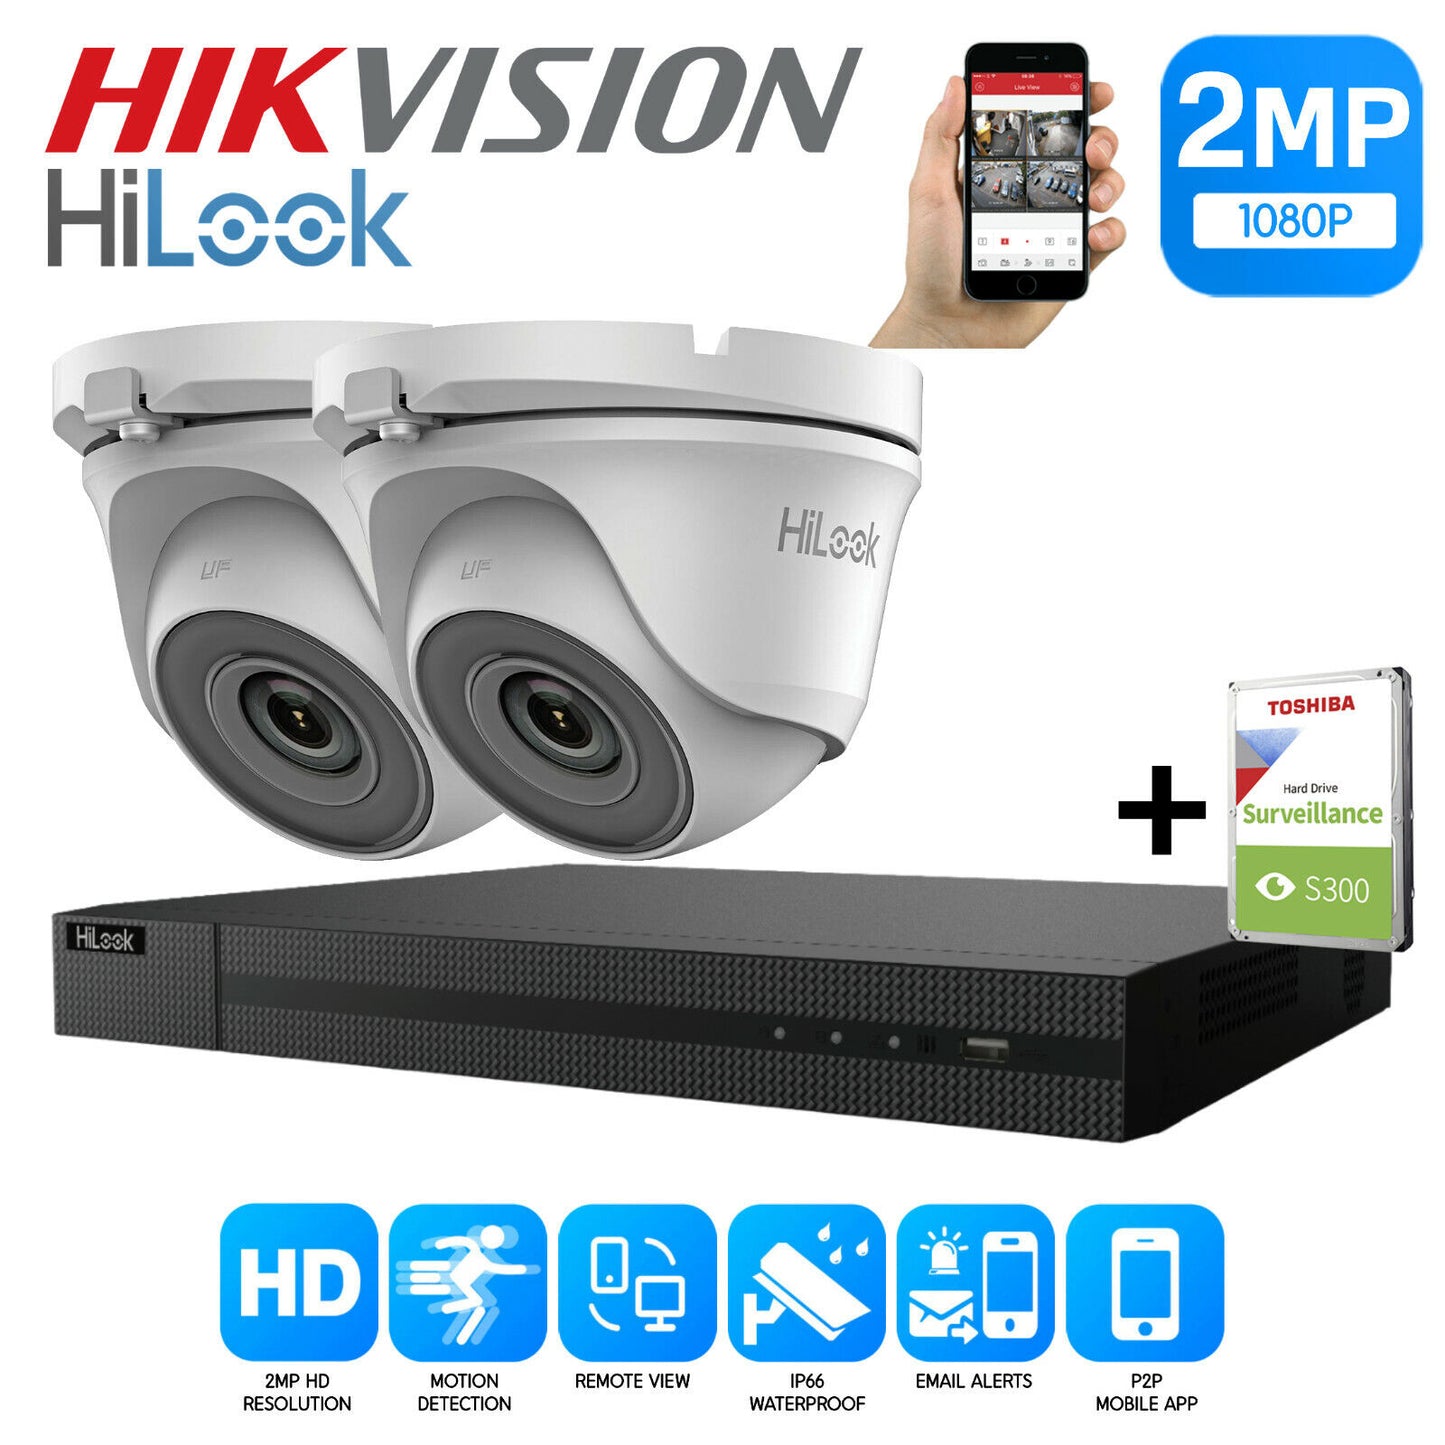 Hikvision Hilook 1080P HD DVR outdoor night vision CCTV system camera kit 4ch DVR 2xCameras (white) 1TB HDD